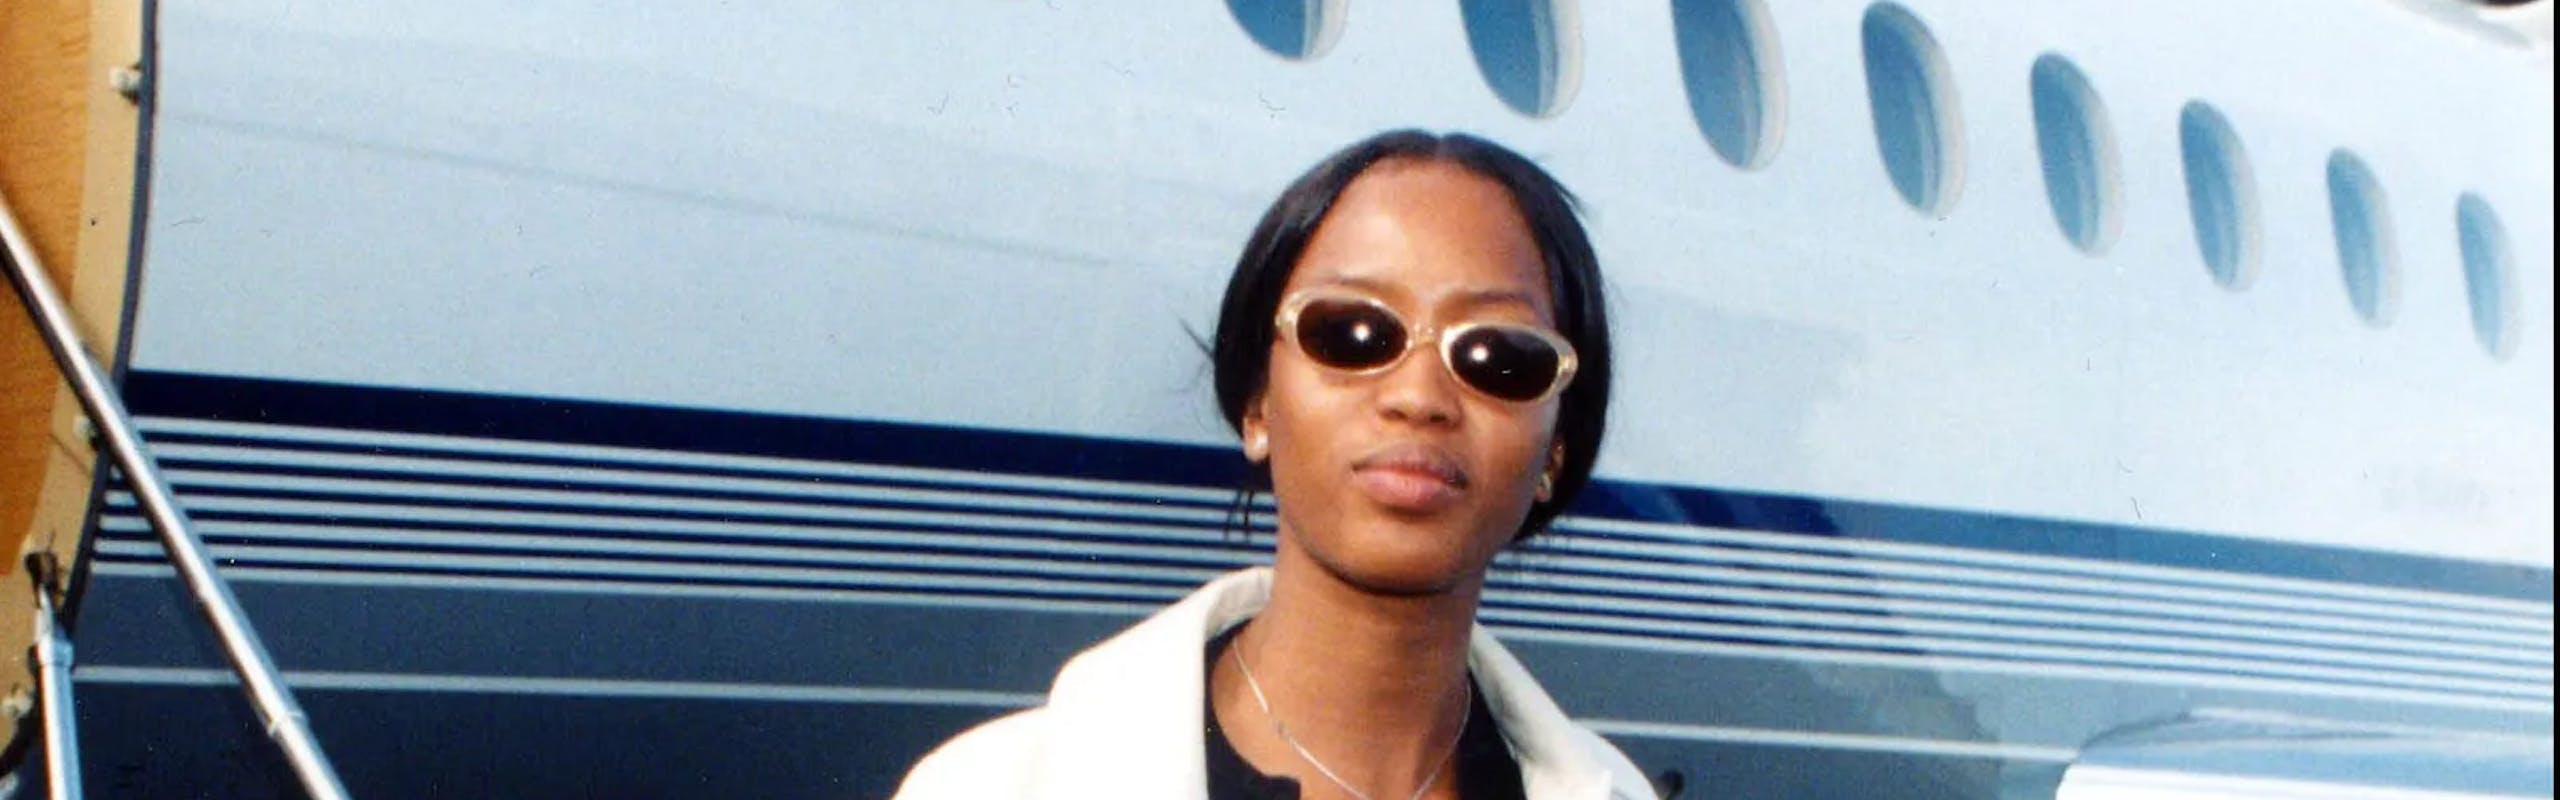 naomi campbell airport style 90s